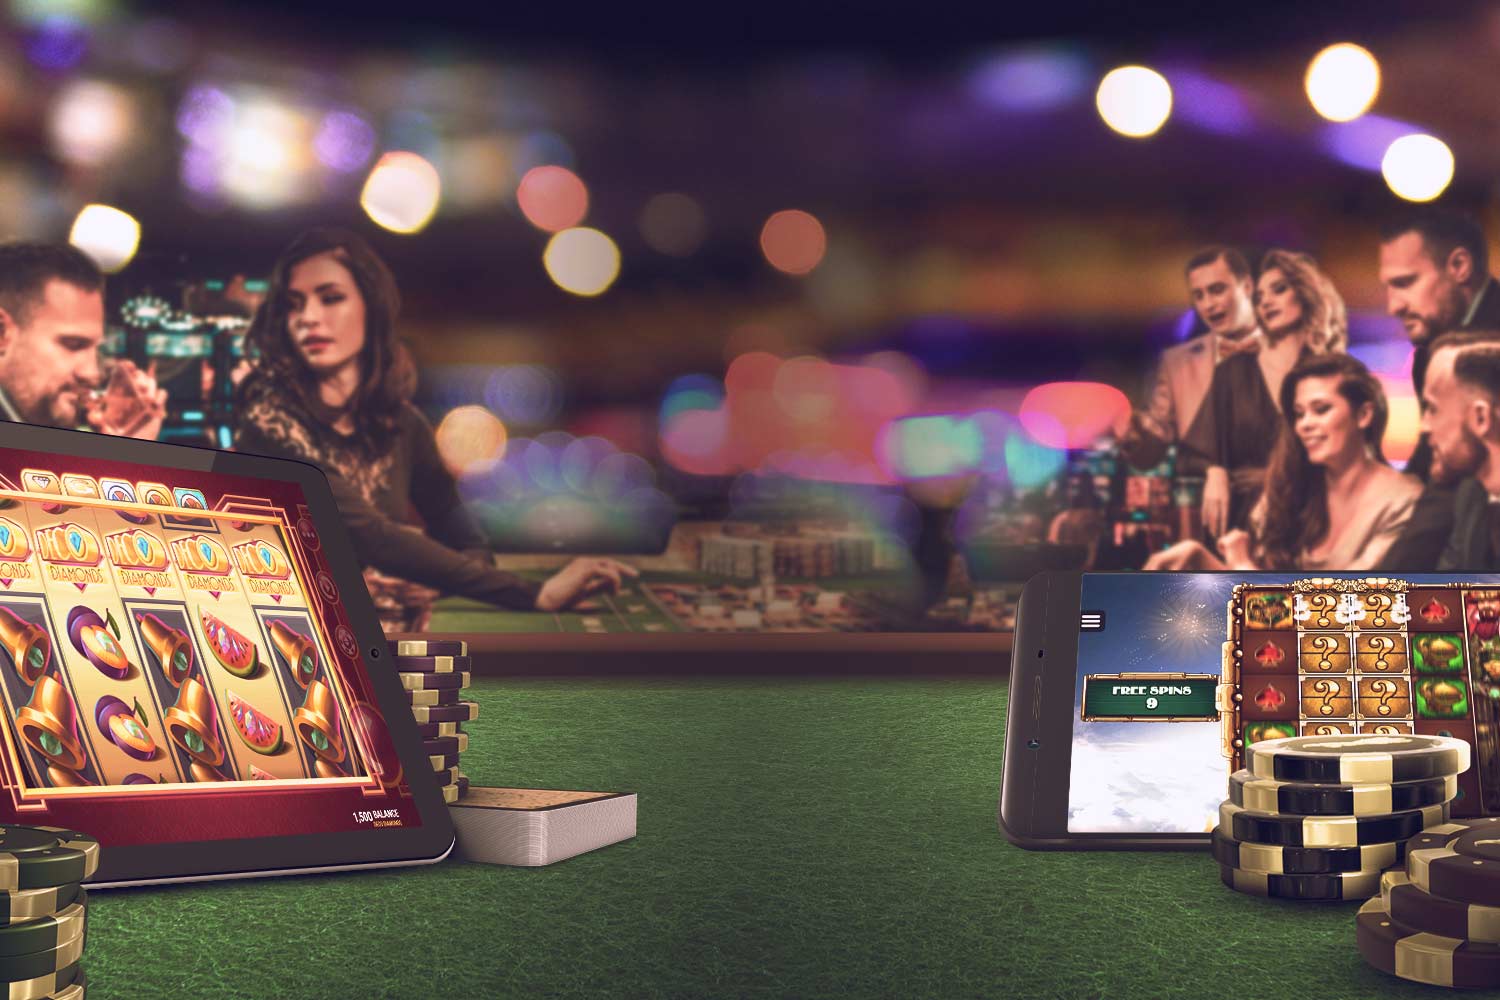 Reasons for playing casino games online